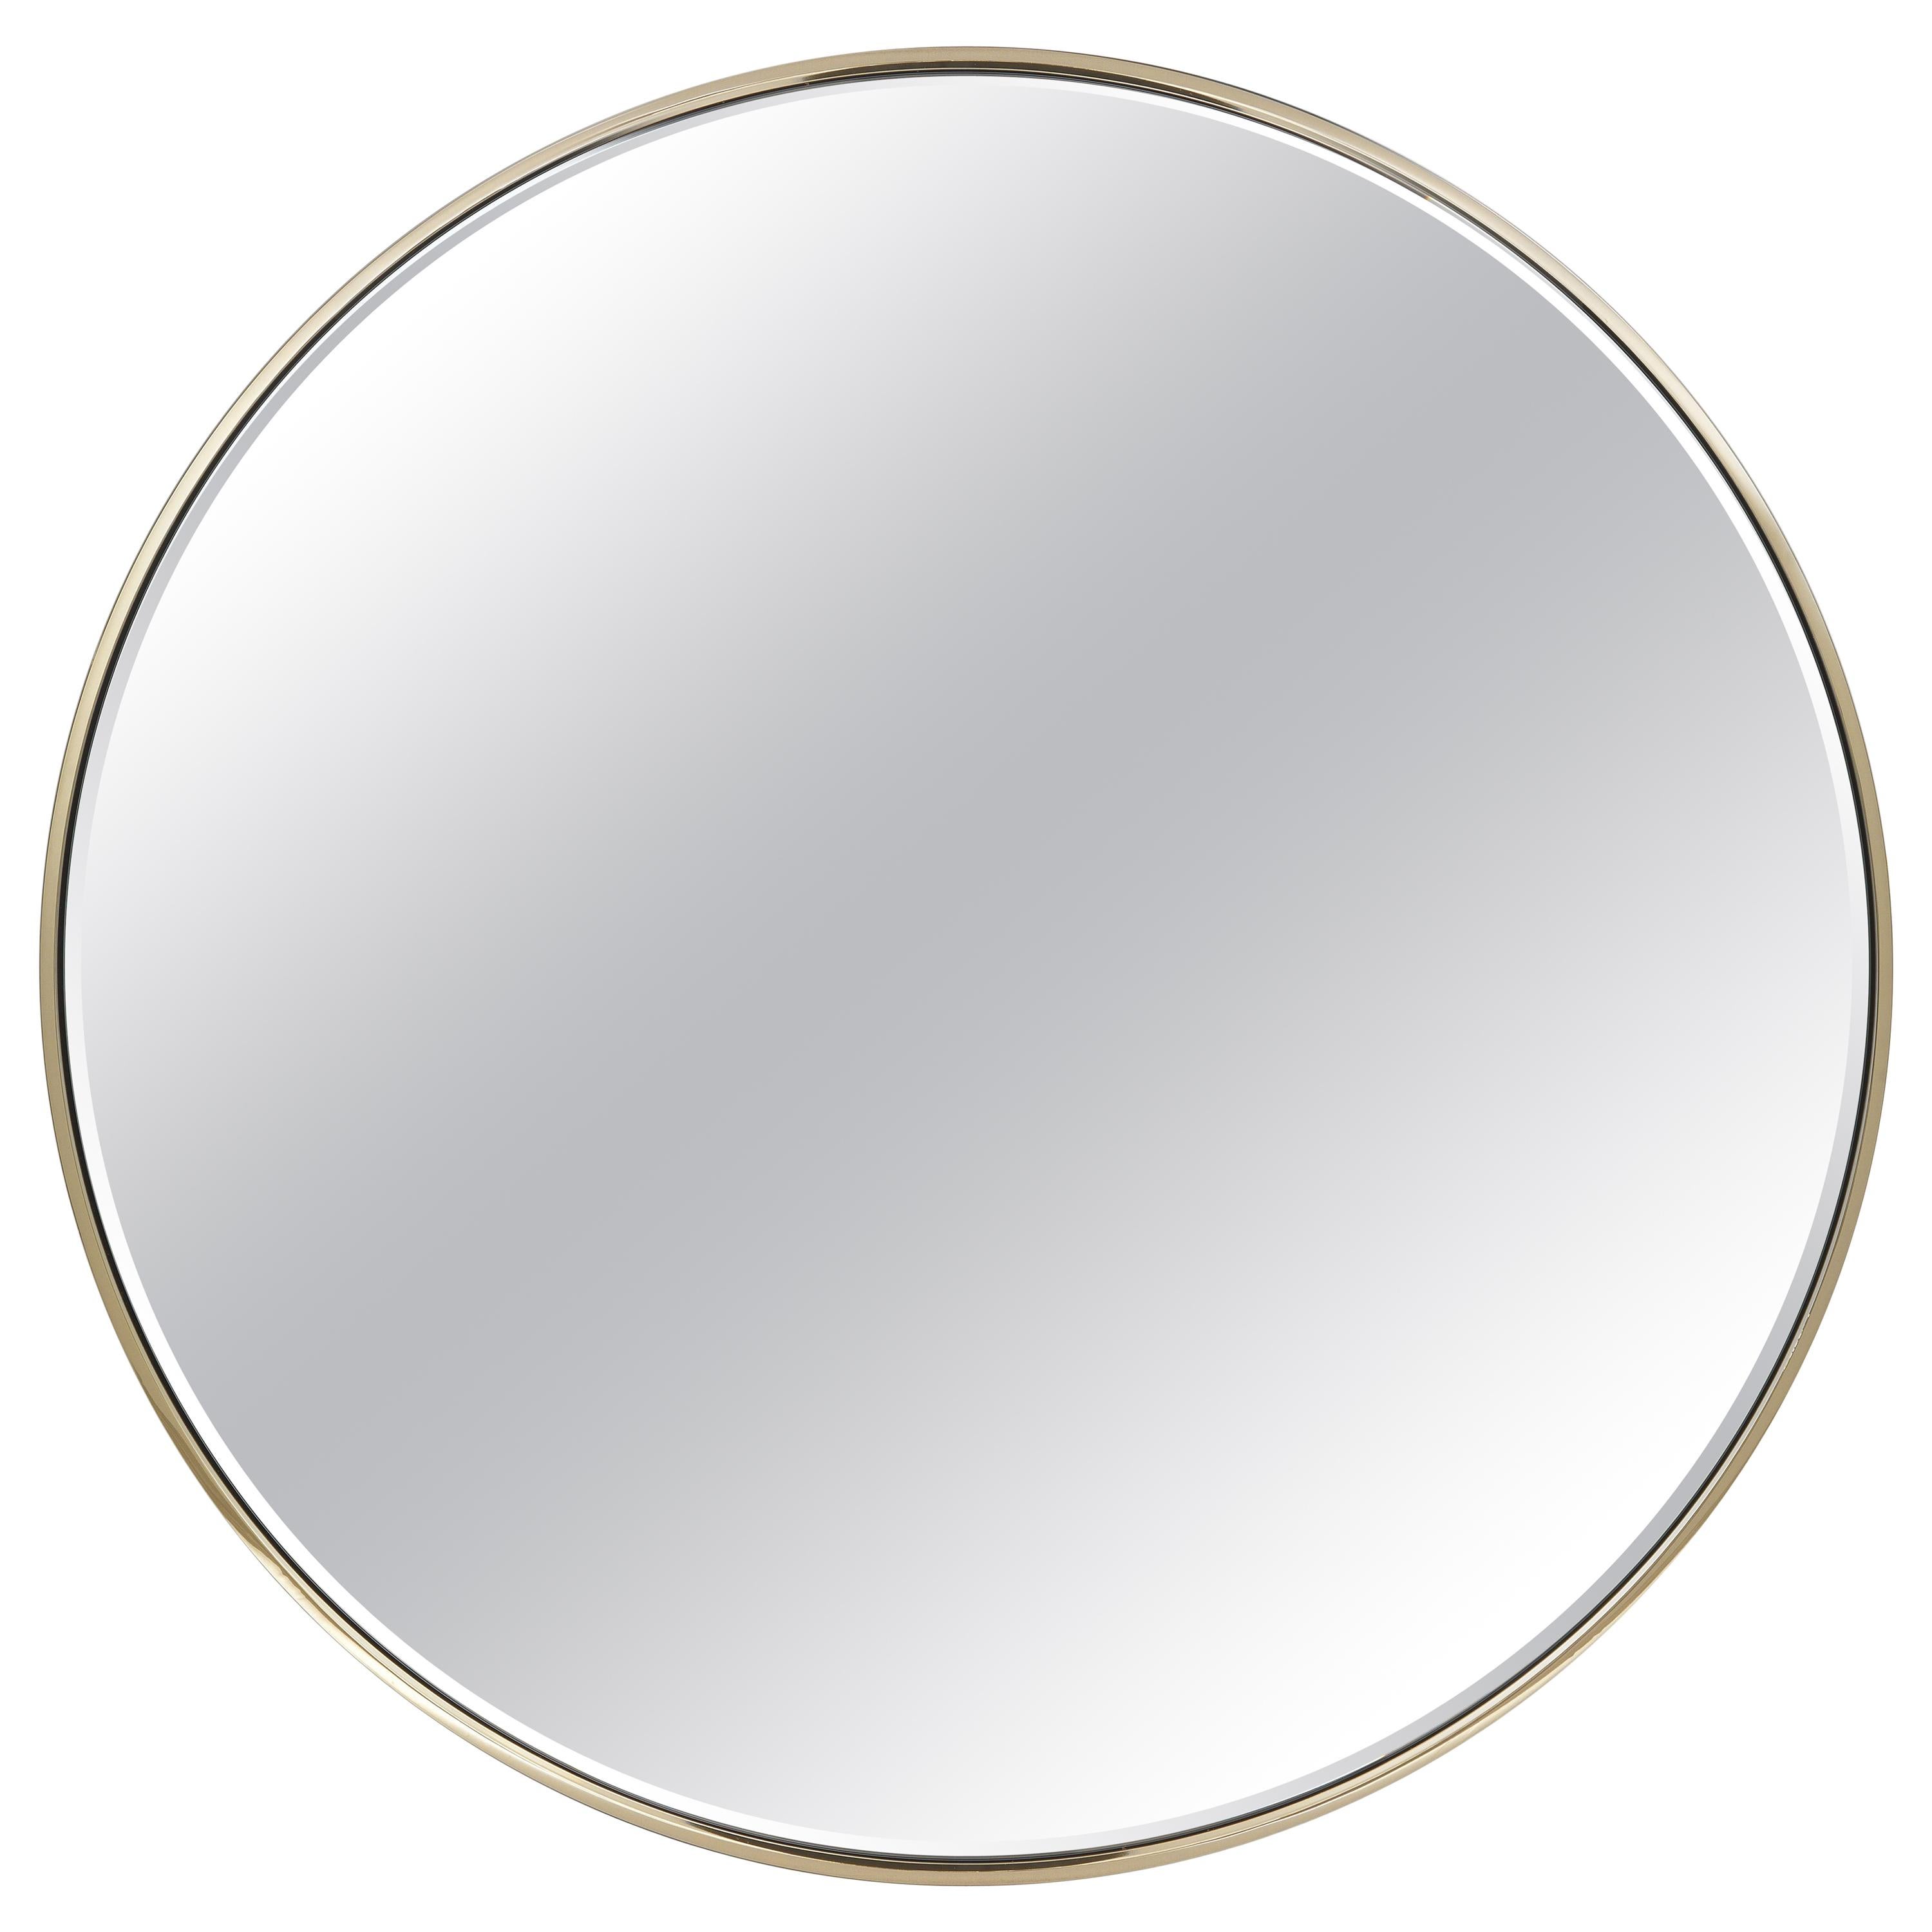 21st Century Casquet Mirror with Metal Frame by Roberto Cavalli Home Interiors  For Sale